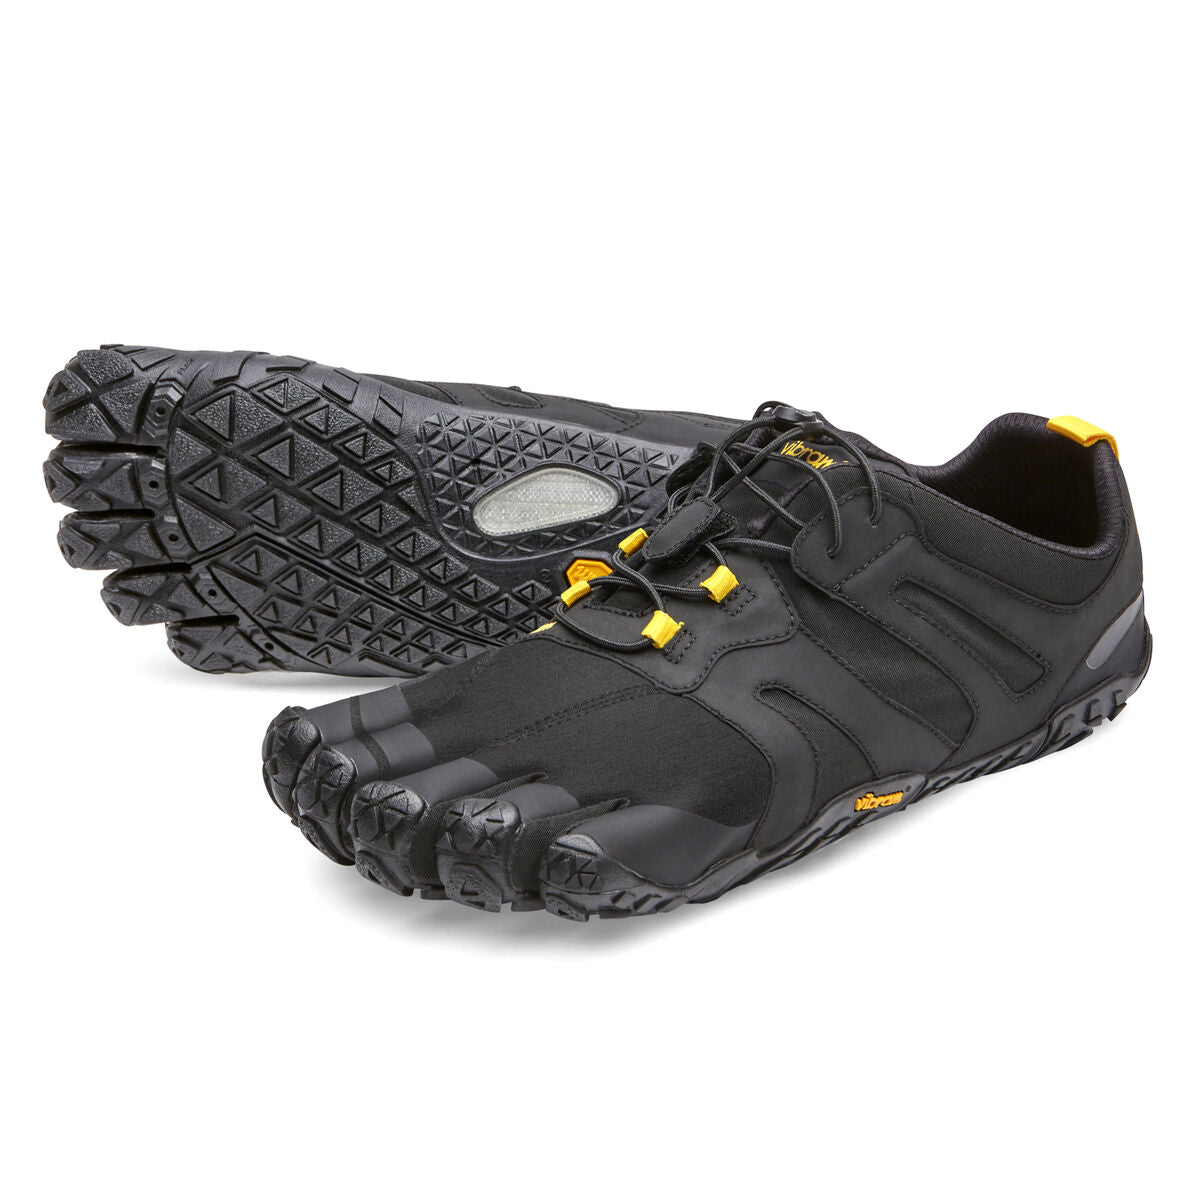 Women's Vibram Five Fingers V-Trail 2.0 Running Shoe in Black/Yellow from the front